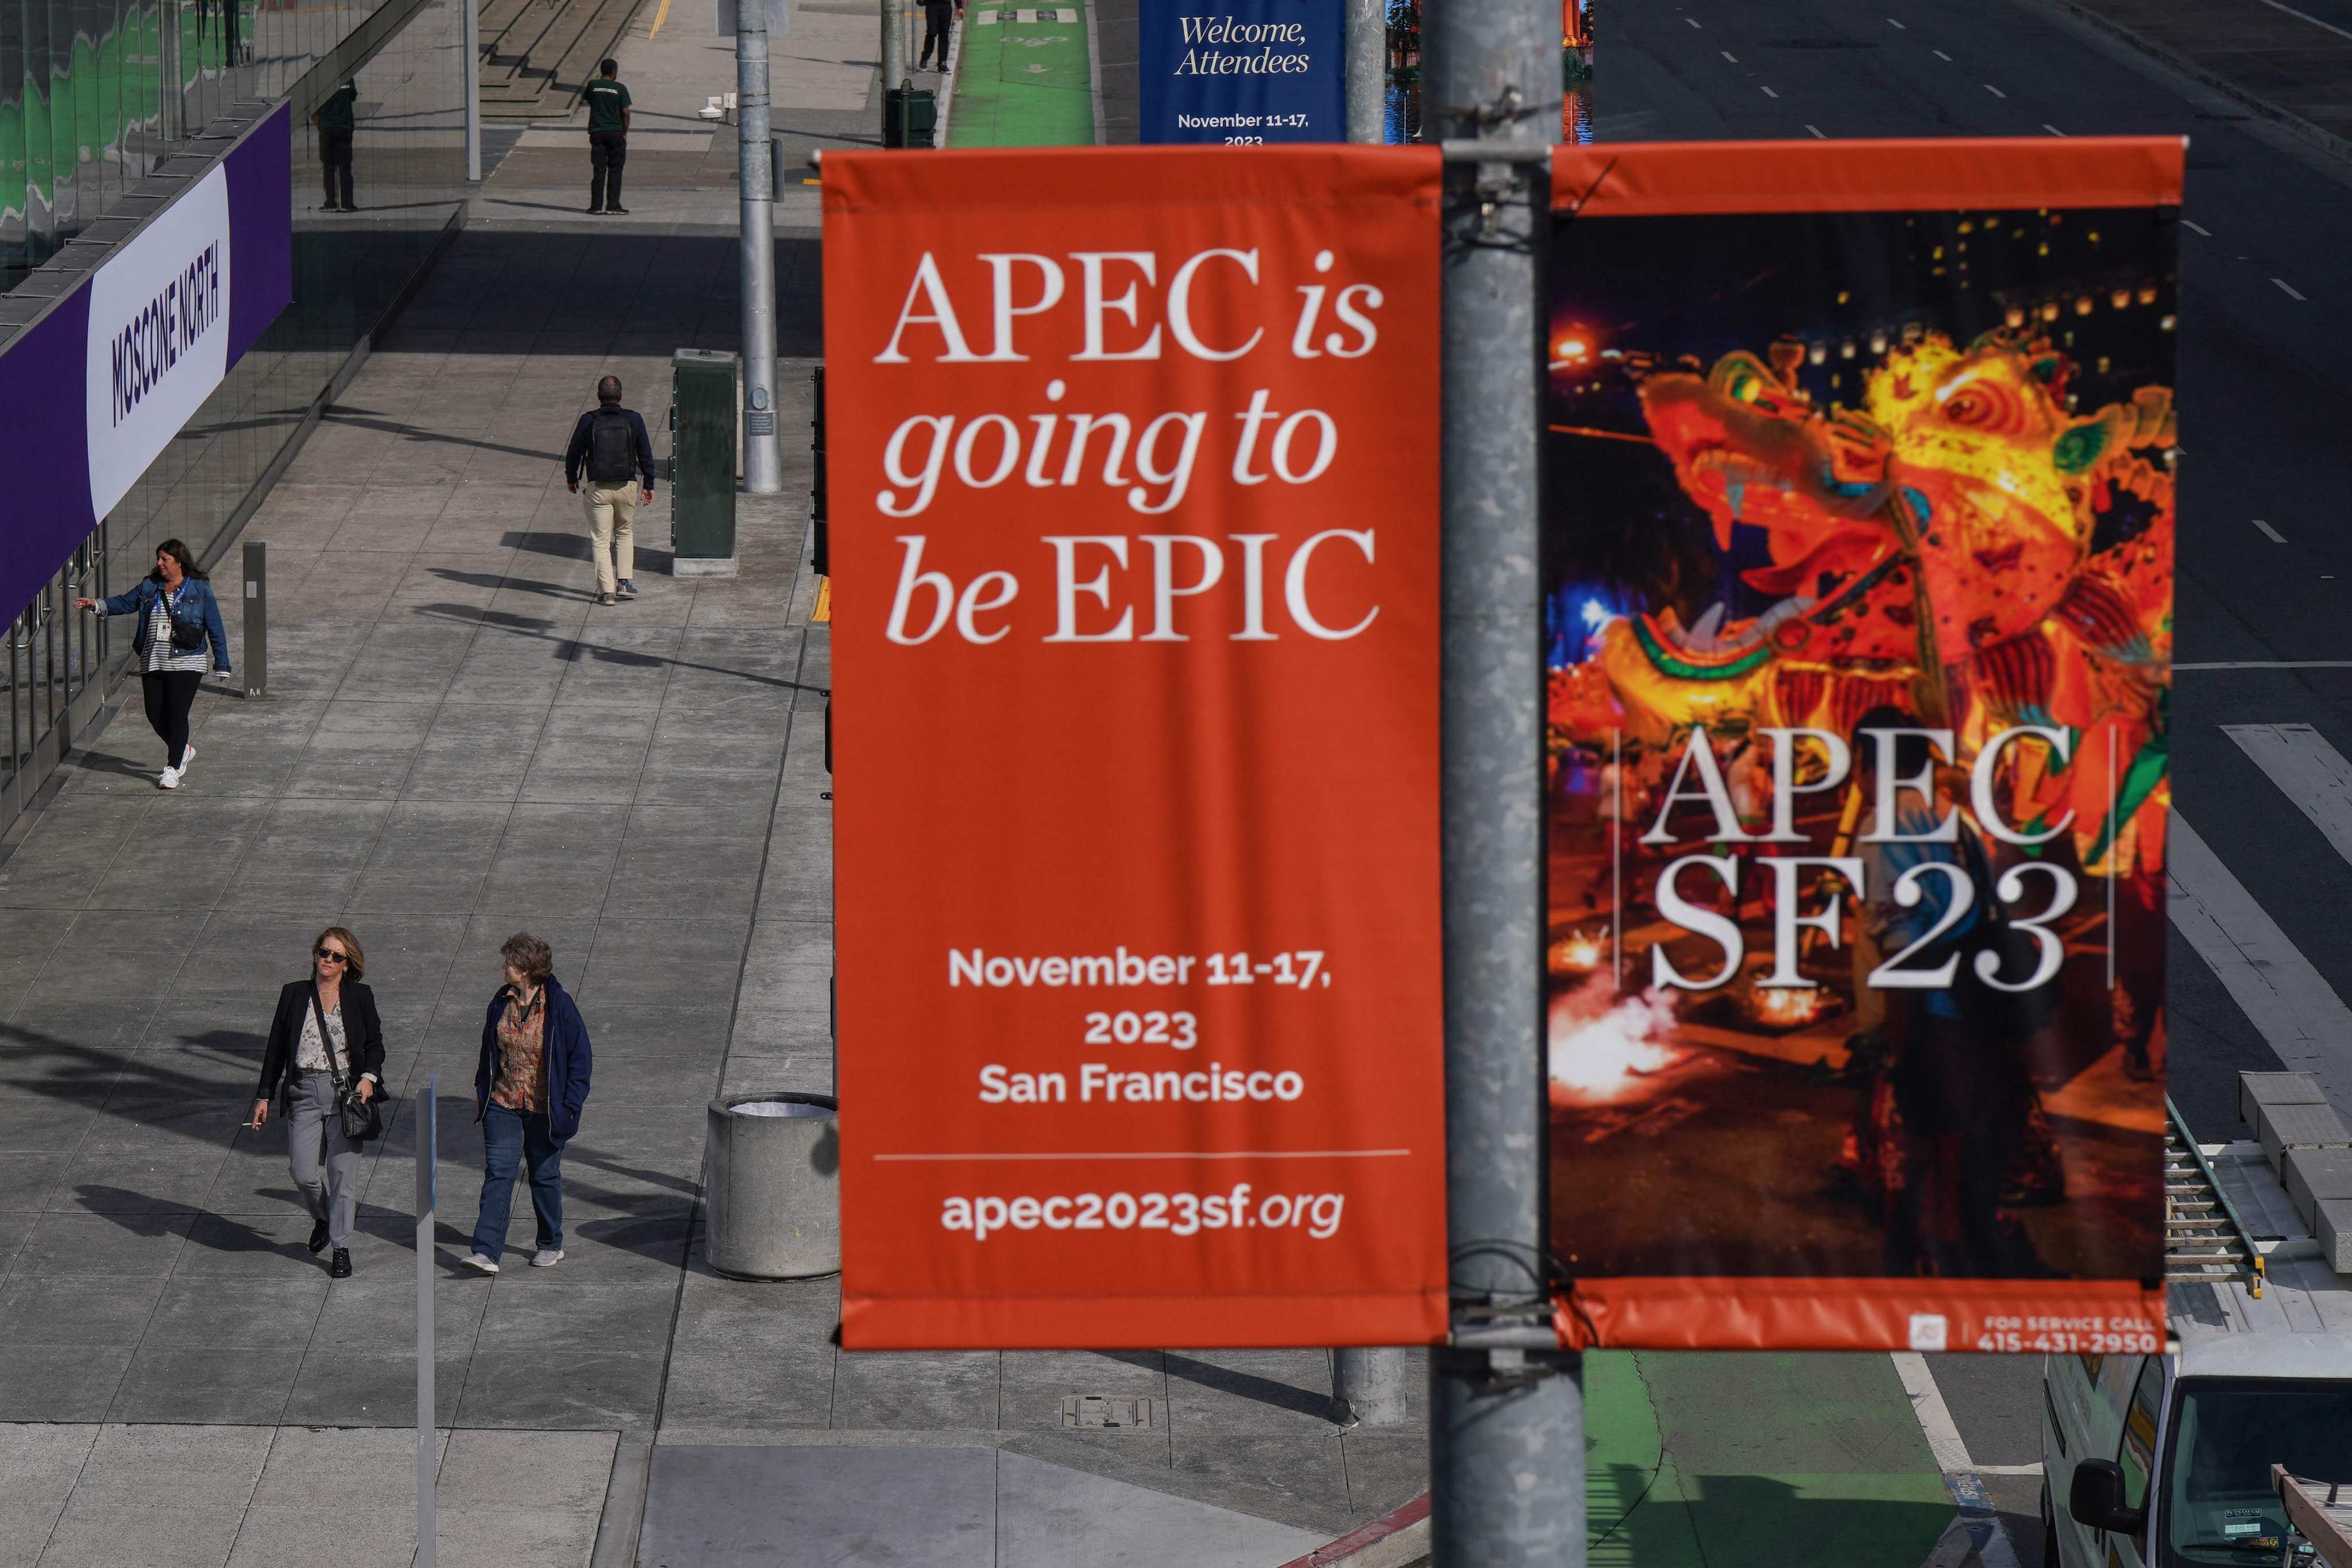 Street banners in San Francisco promote the Asia-Pacific Economic Cooperation summit at the Moscone Centre. Photo: AFP